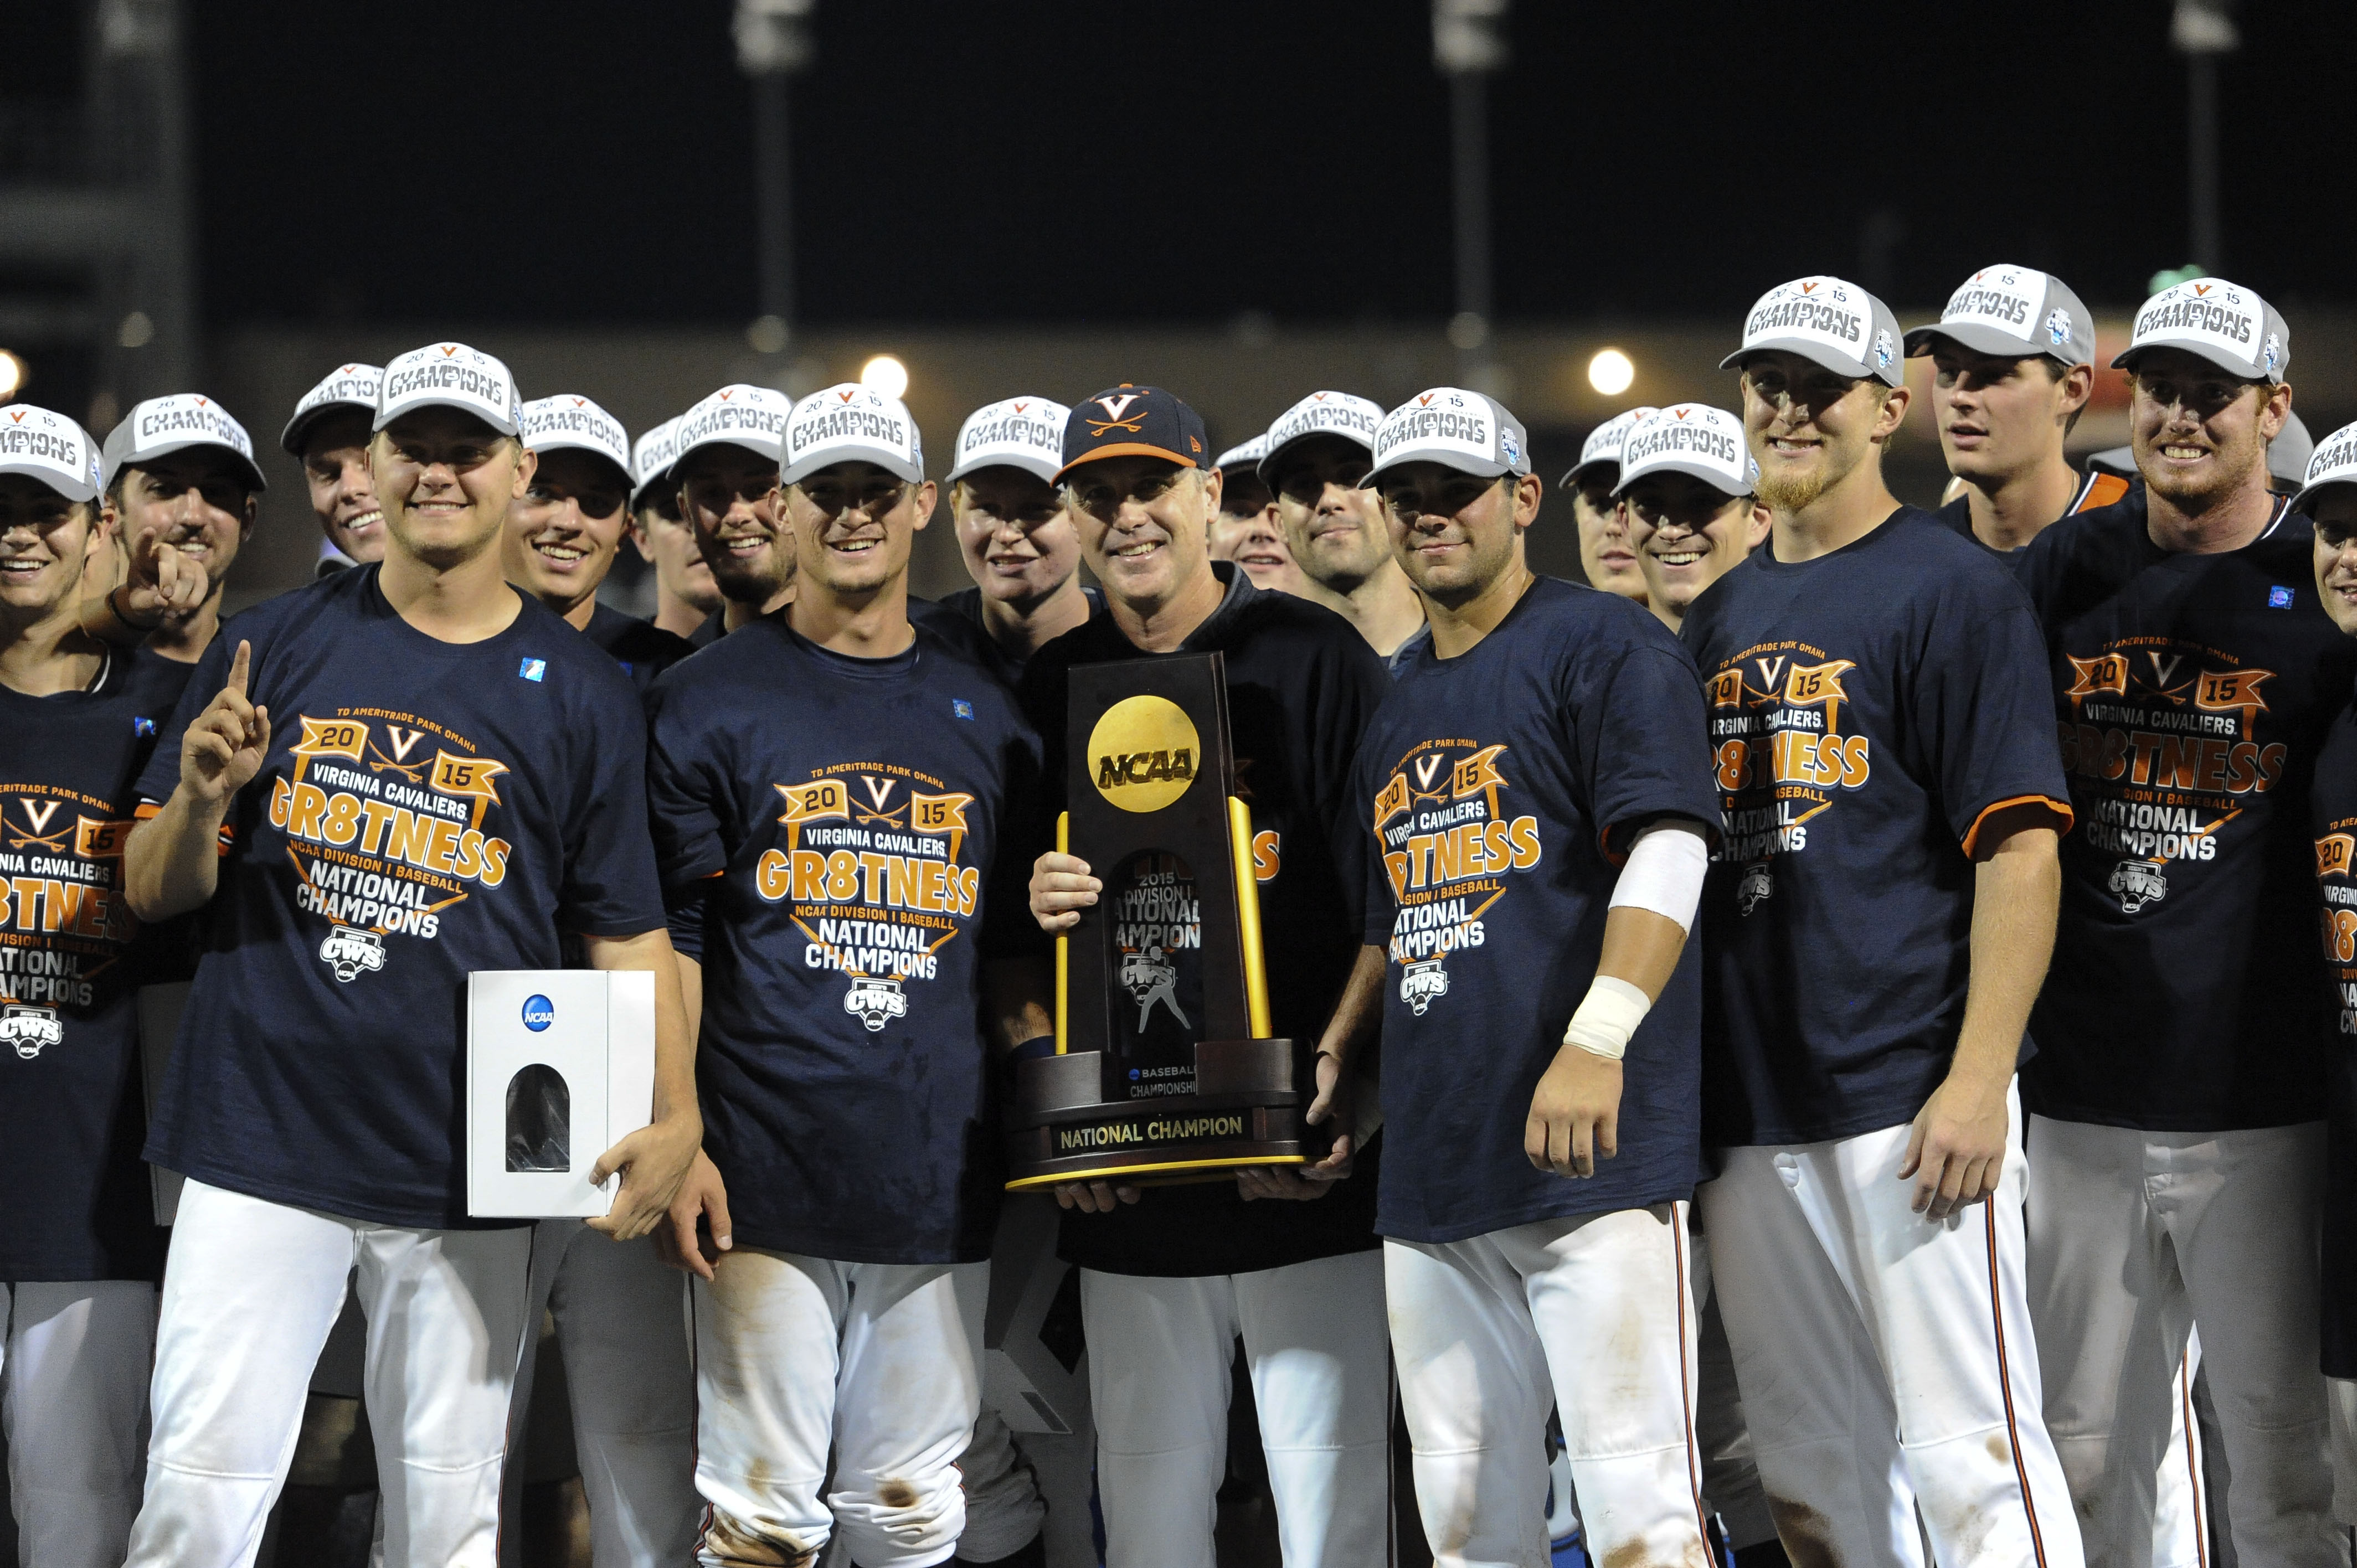 Virginia won the College World Series and took the happiest photos on